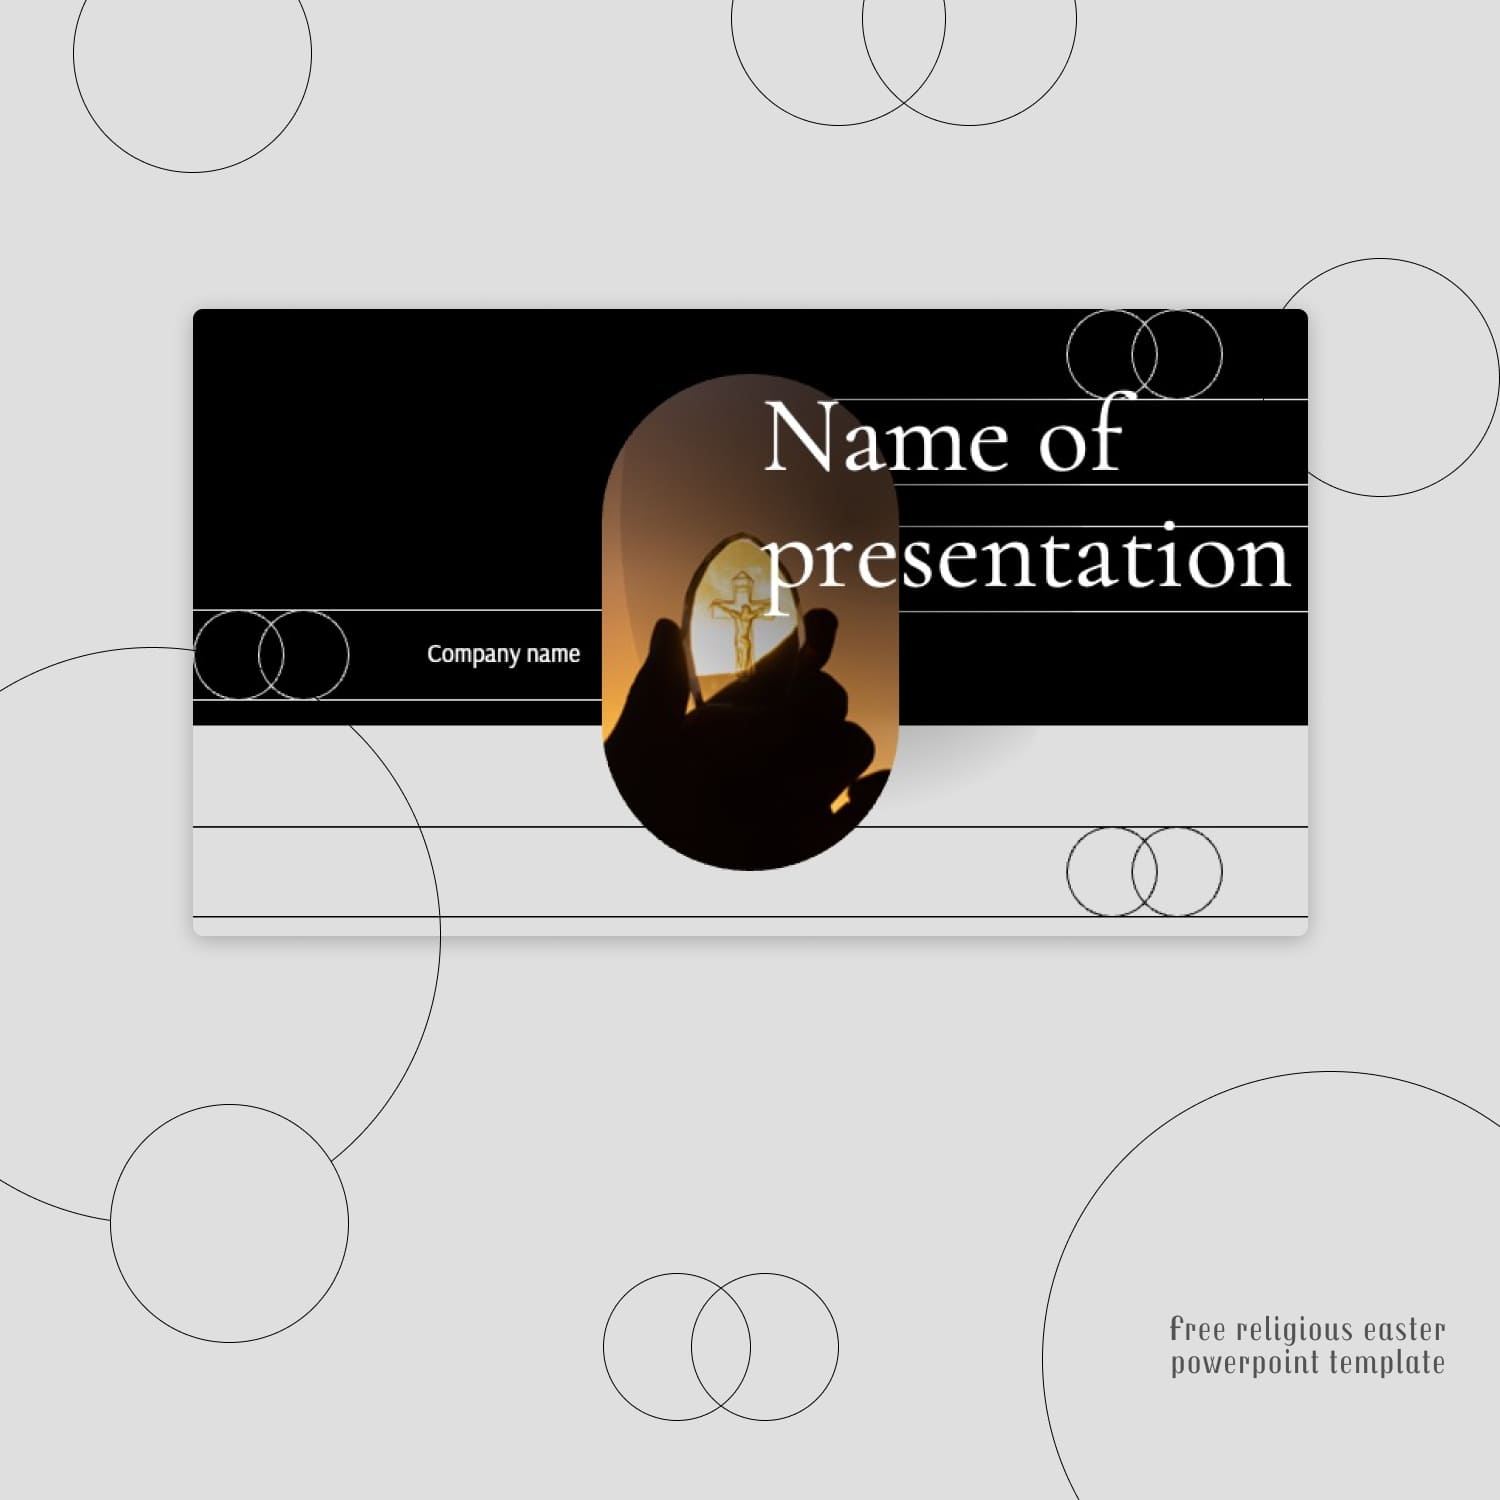 Free Religious Easter Powerpoint Template 1500 1.